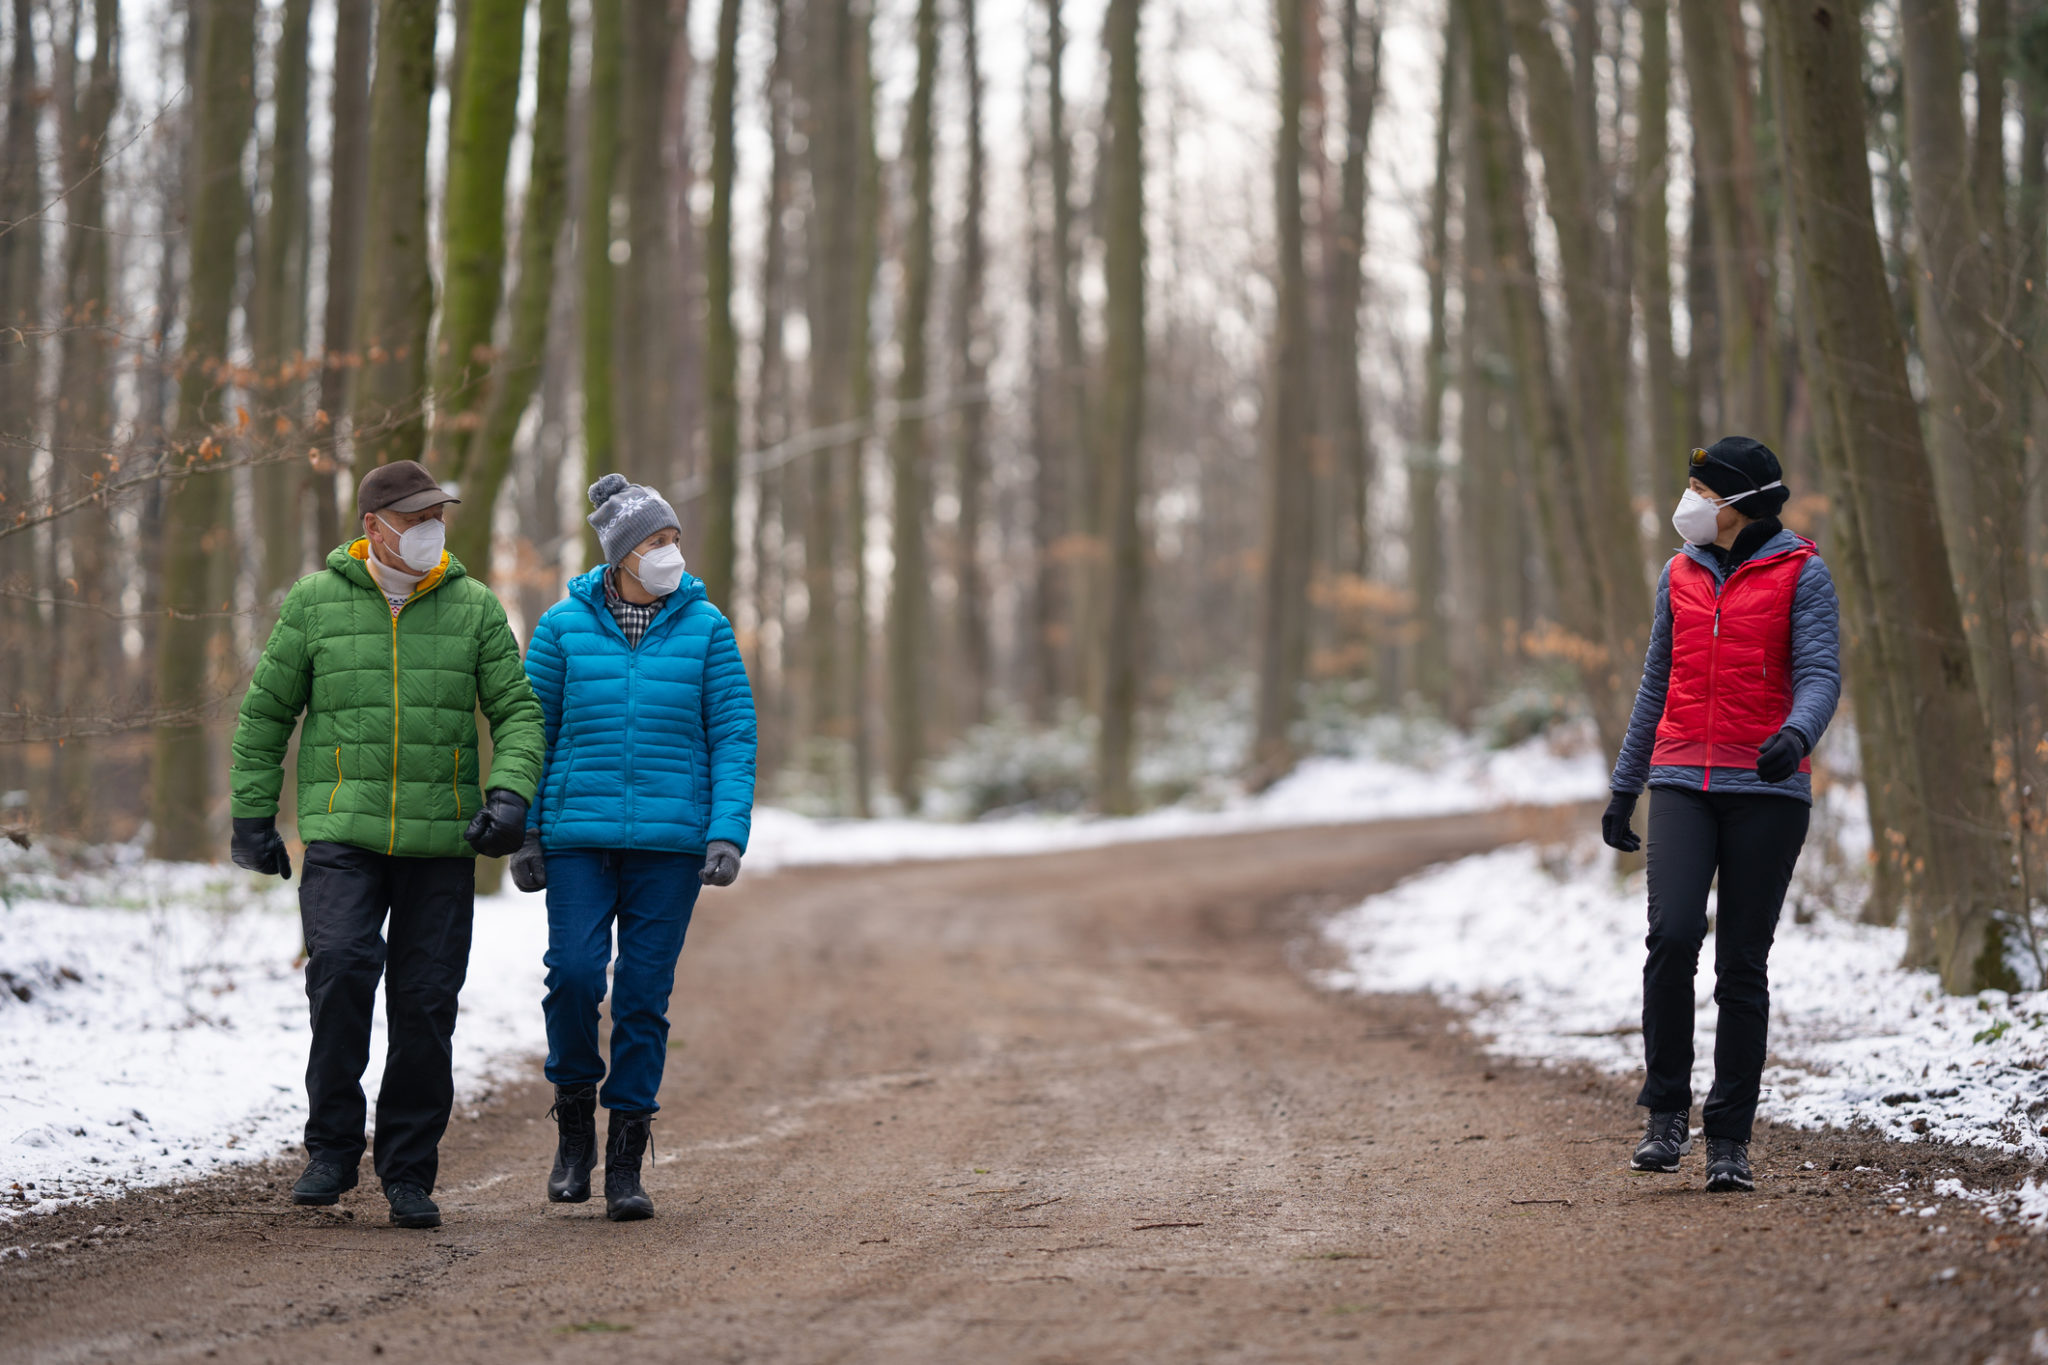 Three people outdoors hiking with masks